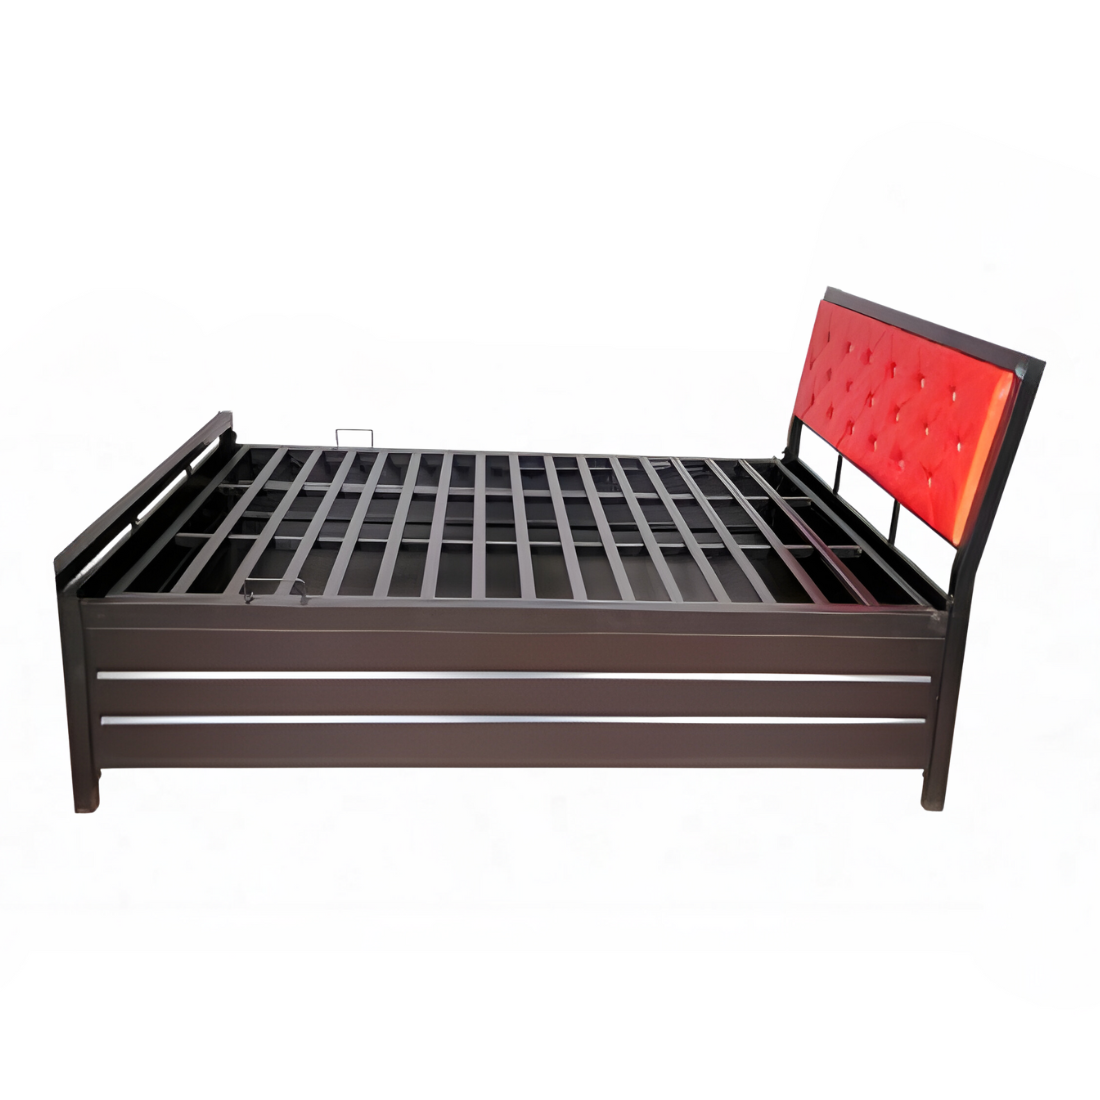 Heath Hydraulic Storage Queen Metal Bed with Red Cushion Headrest (Color - Black)